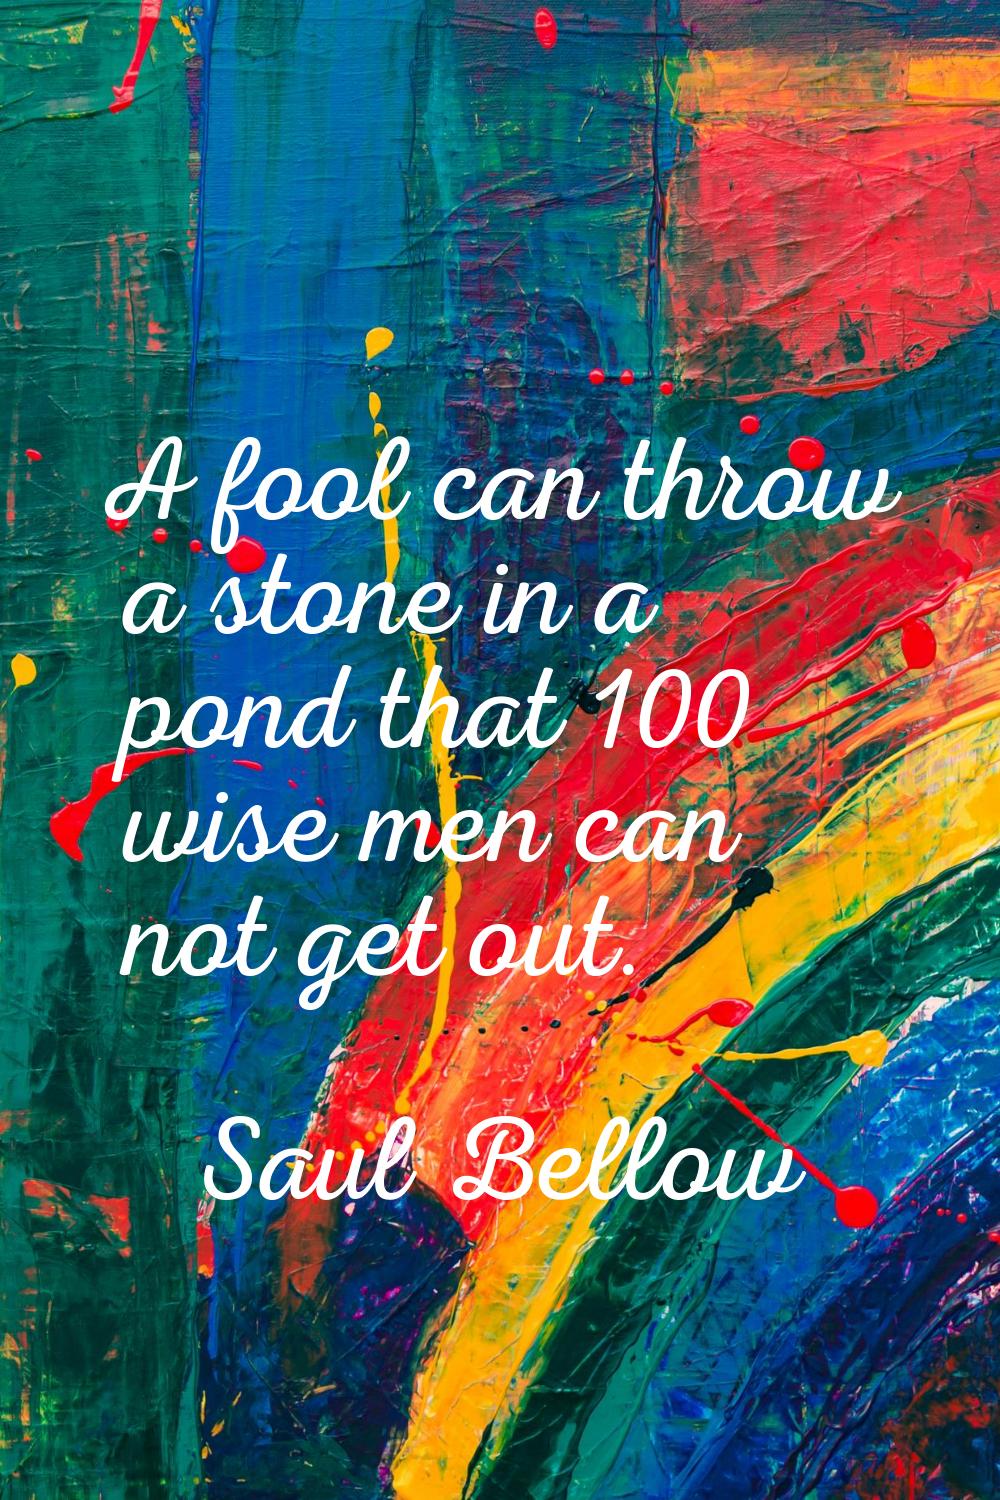 A fool can throw a stone in a pond that 100 wise men can not get out.